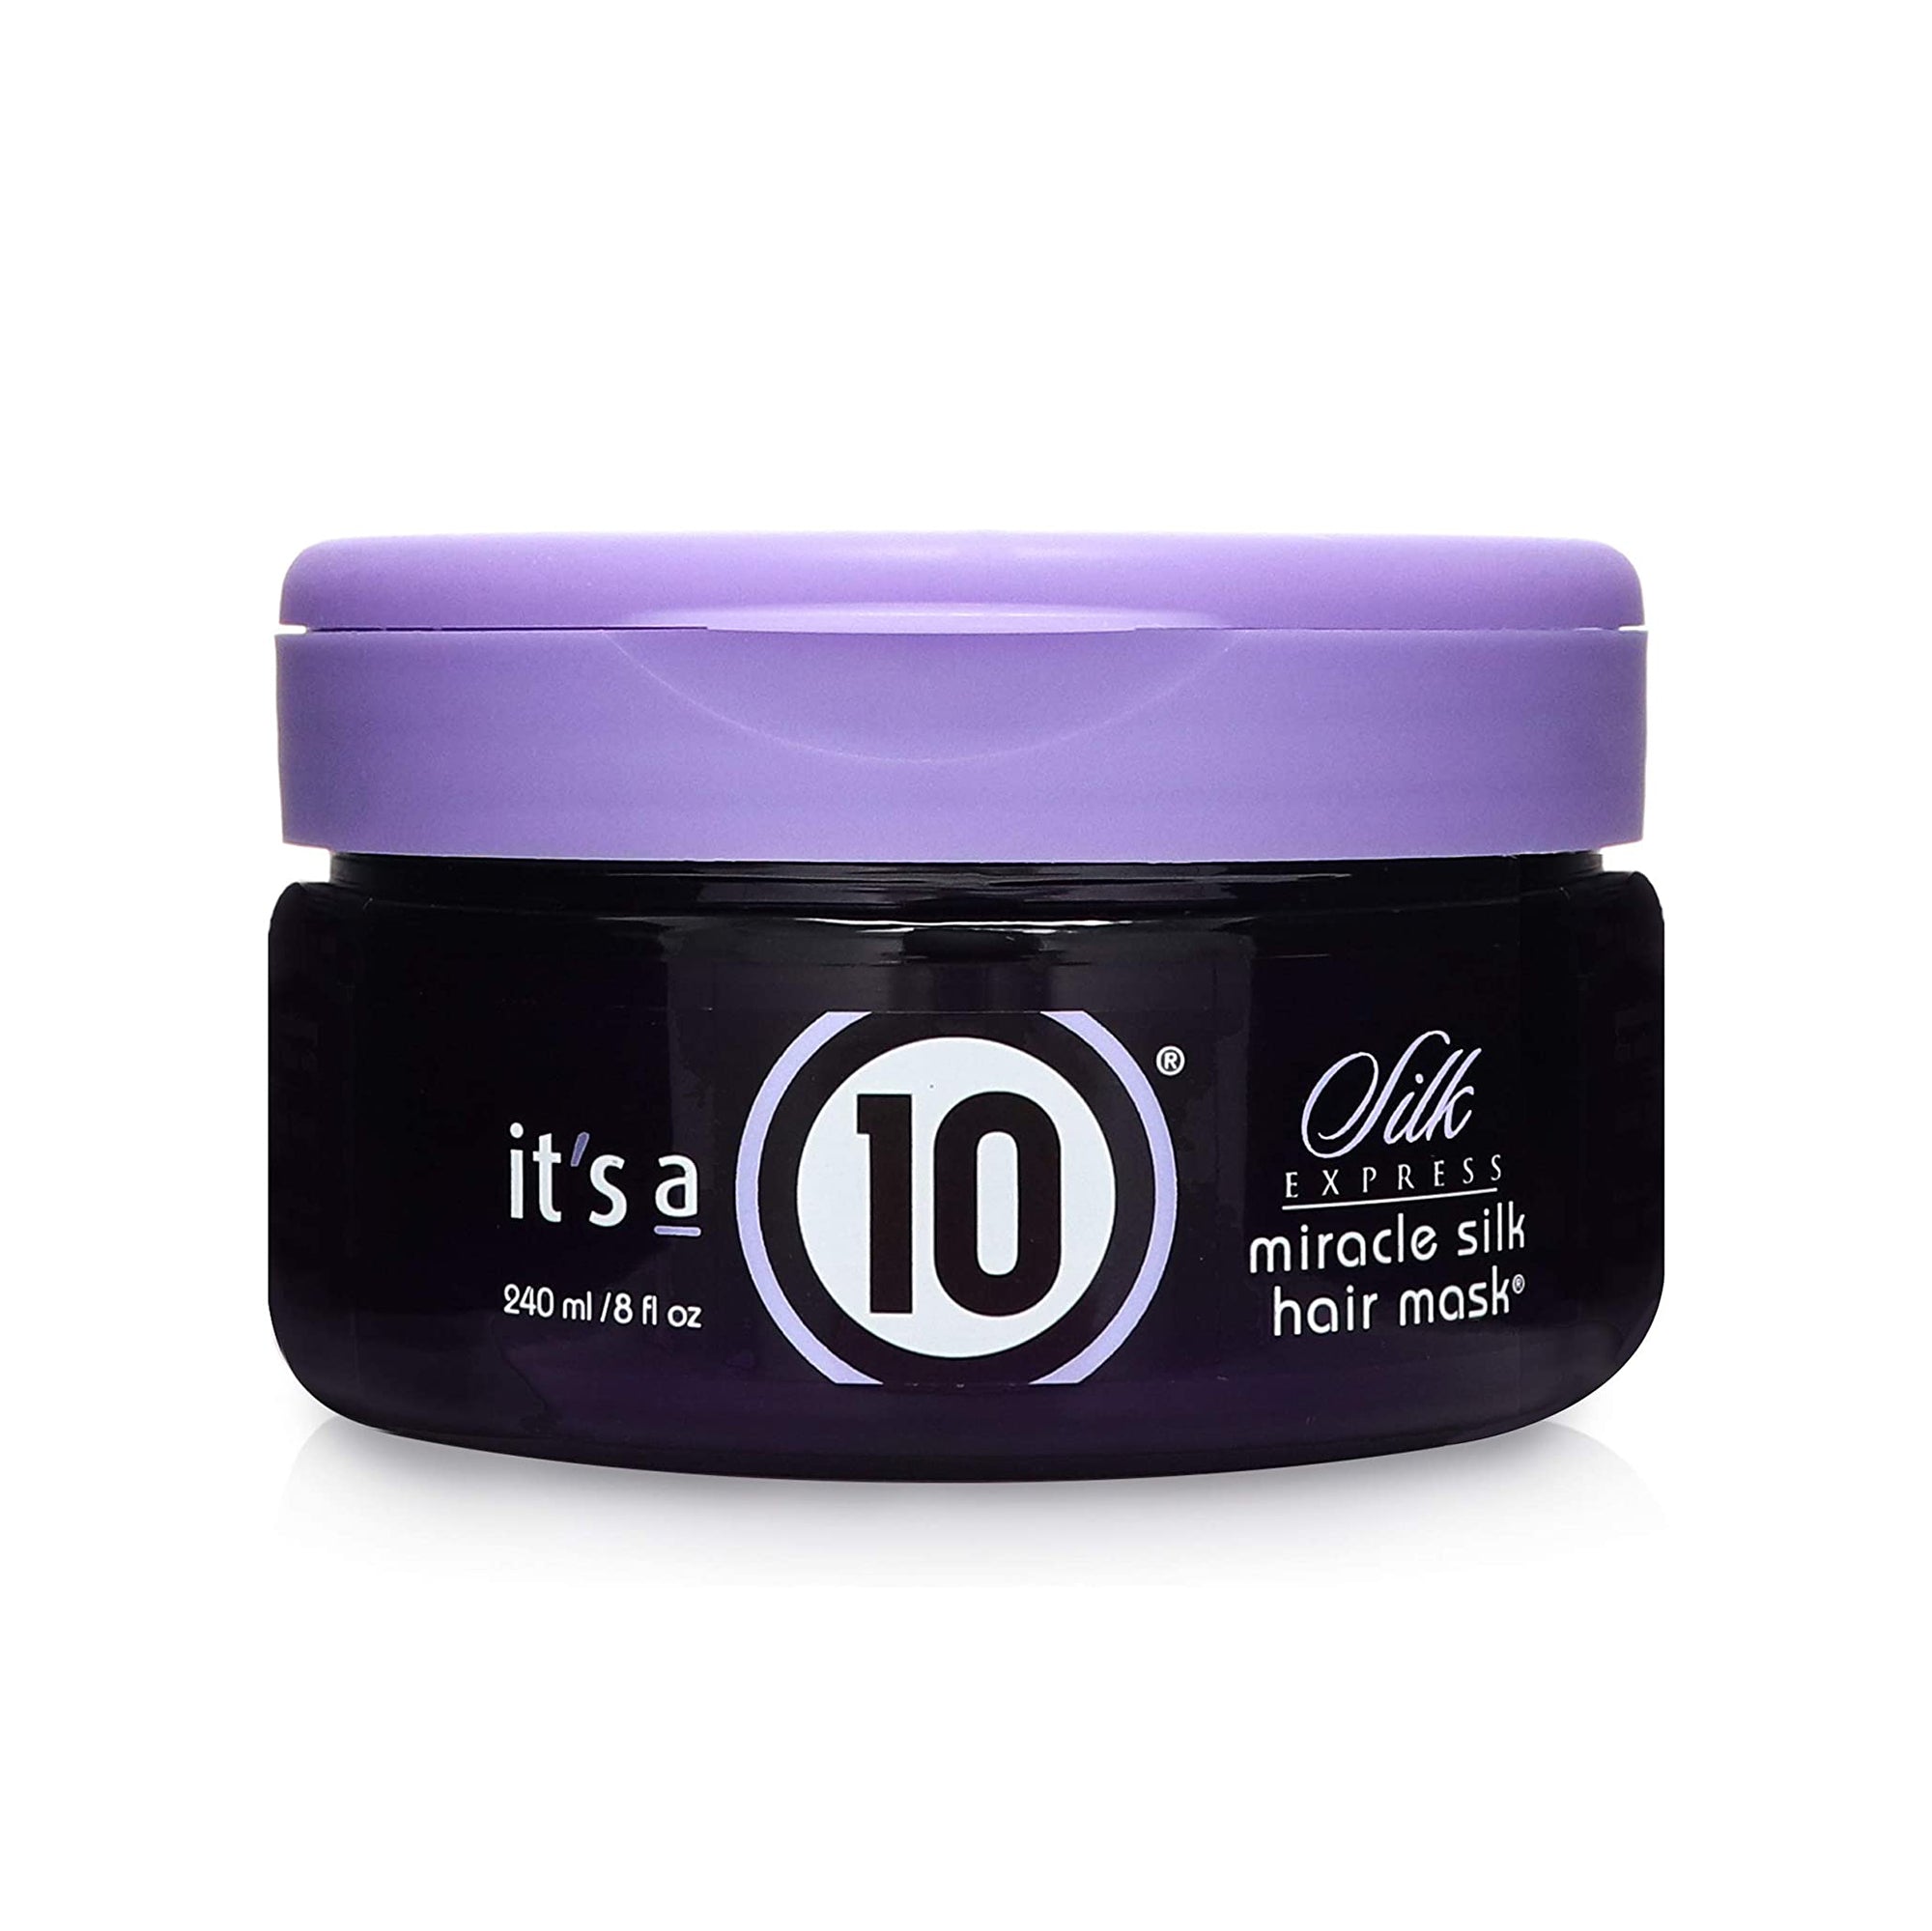 It’s a 10 Miracle Silk Hair Mask / 8.OZ